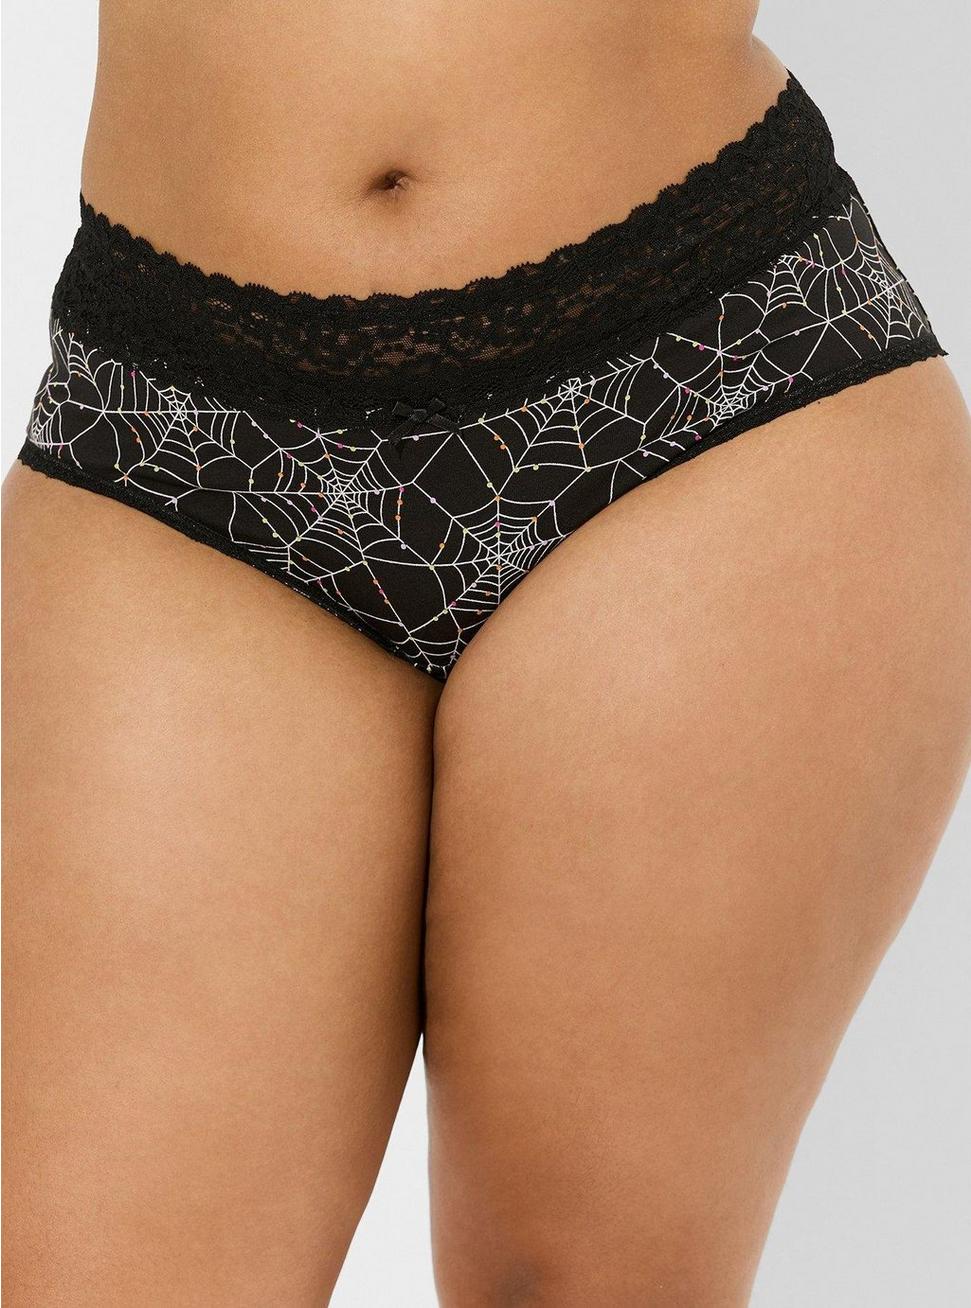 Plus Size Cotton Mid-Rise Cheeky Lace Trim Panty, ALLOVER SPIDERWEBS BLACK, alternate